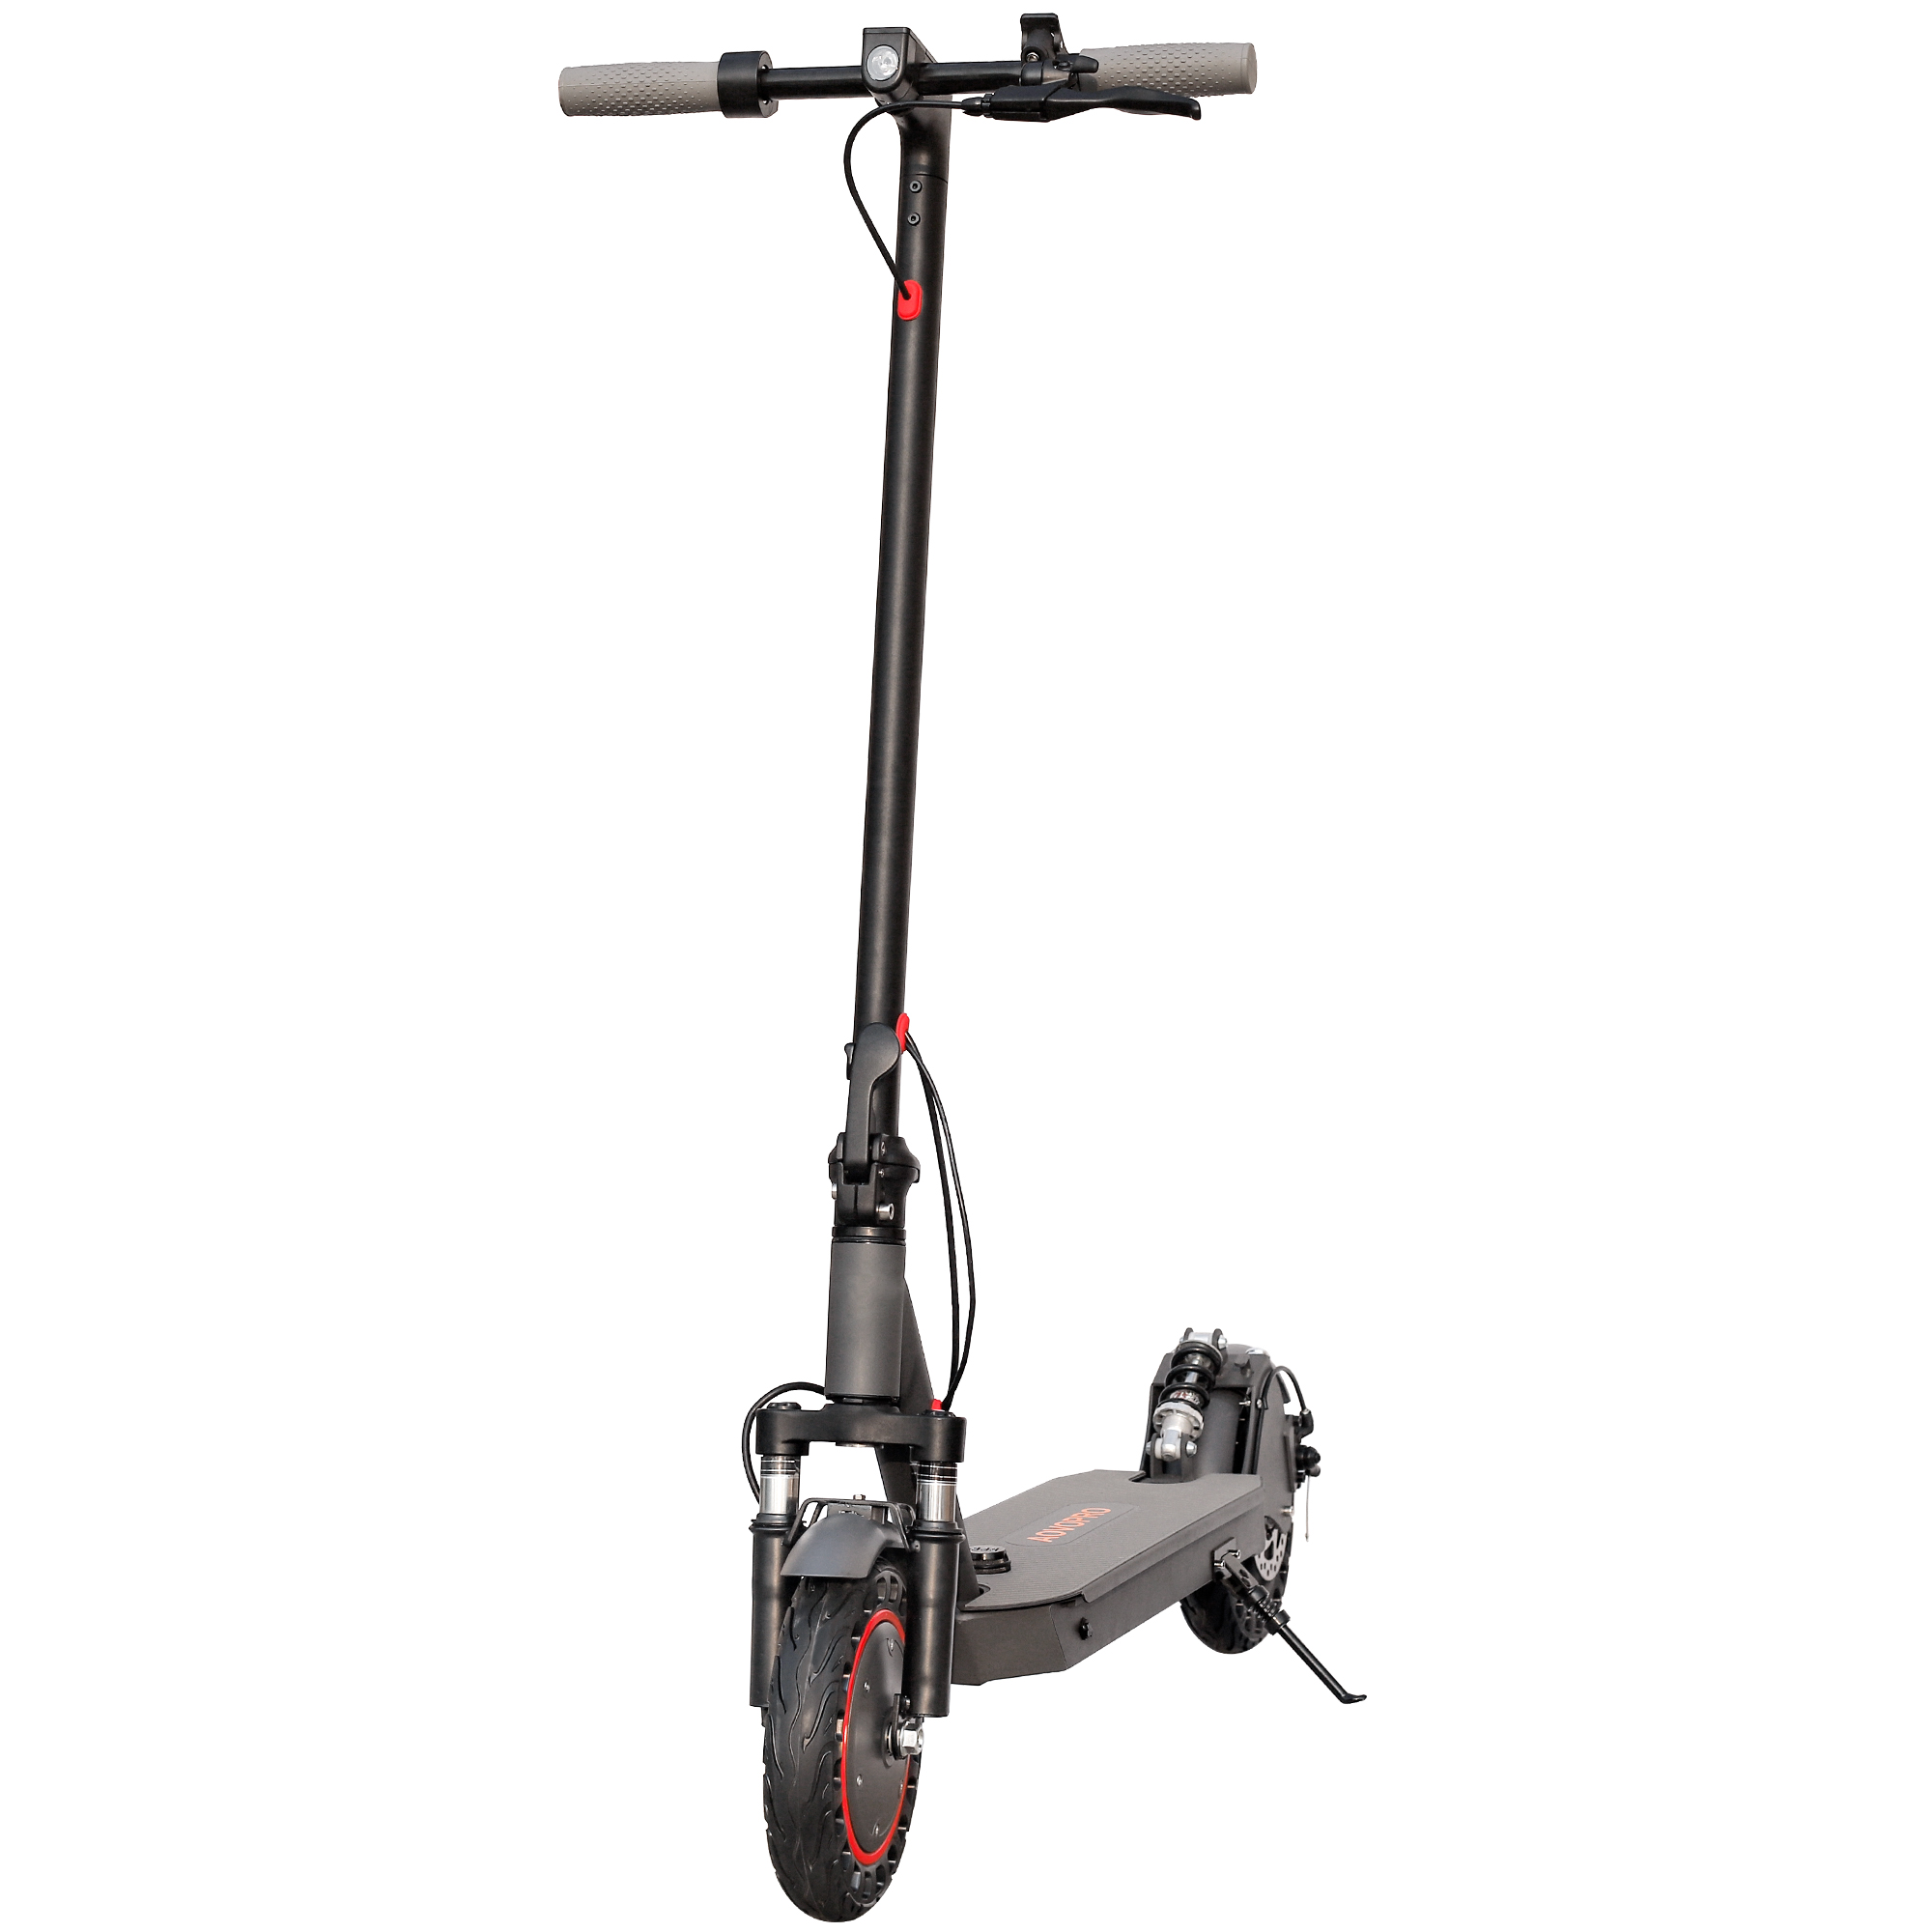 Find EU Direct AOVOPRO ESMAX 36V 18Ah 350W 10in Folding Electric Scooter 25km/h Top Speed 120kg Max Load Speed E Scooter for Sale on Gipsybee.com with cryptocurrencies